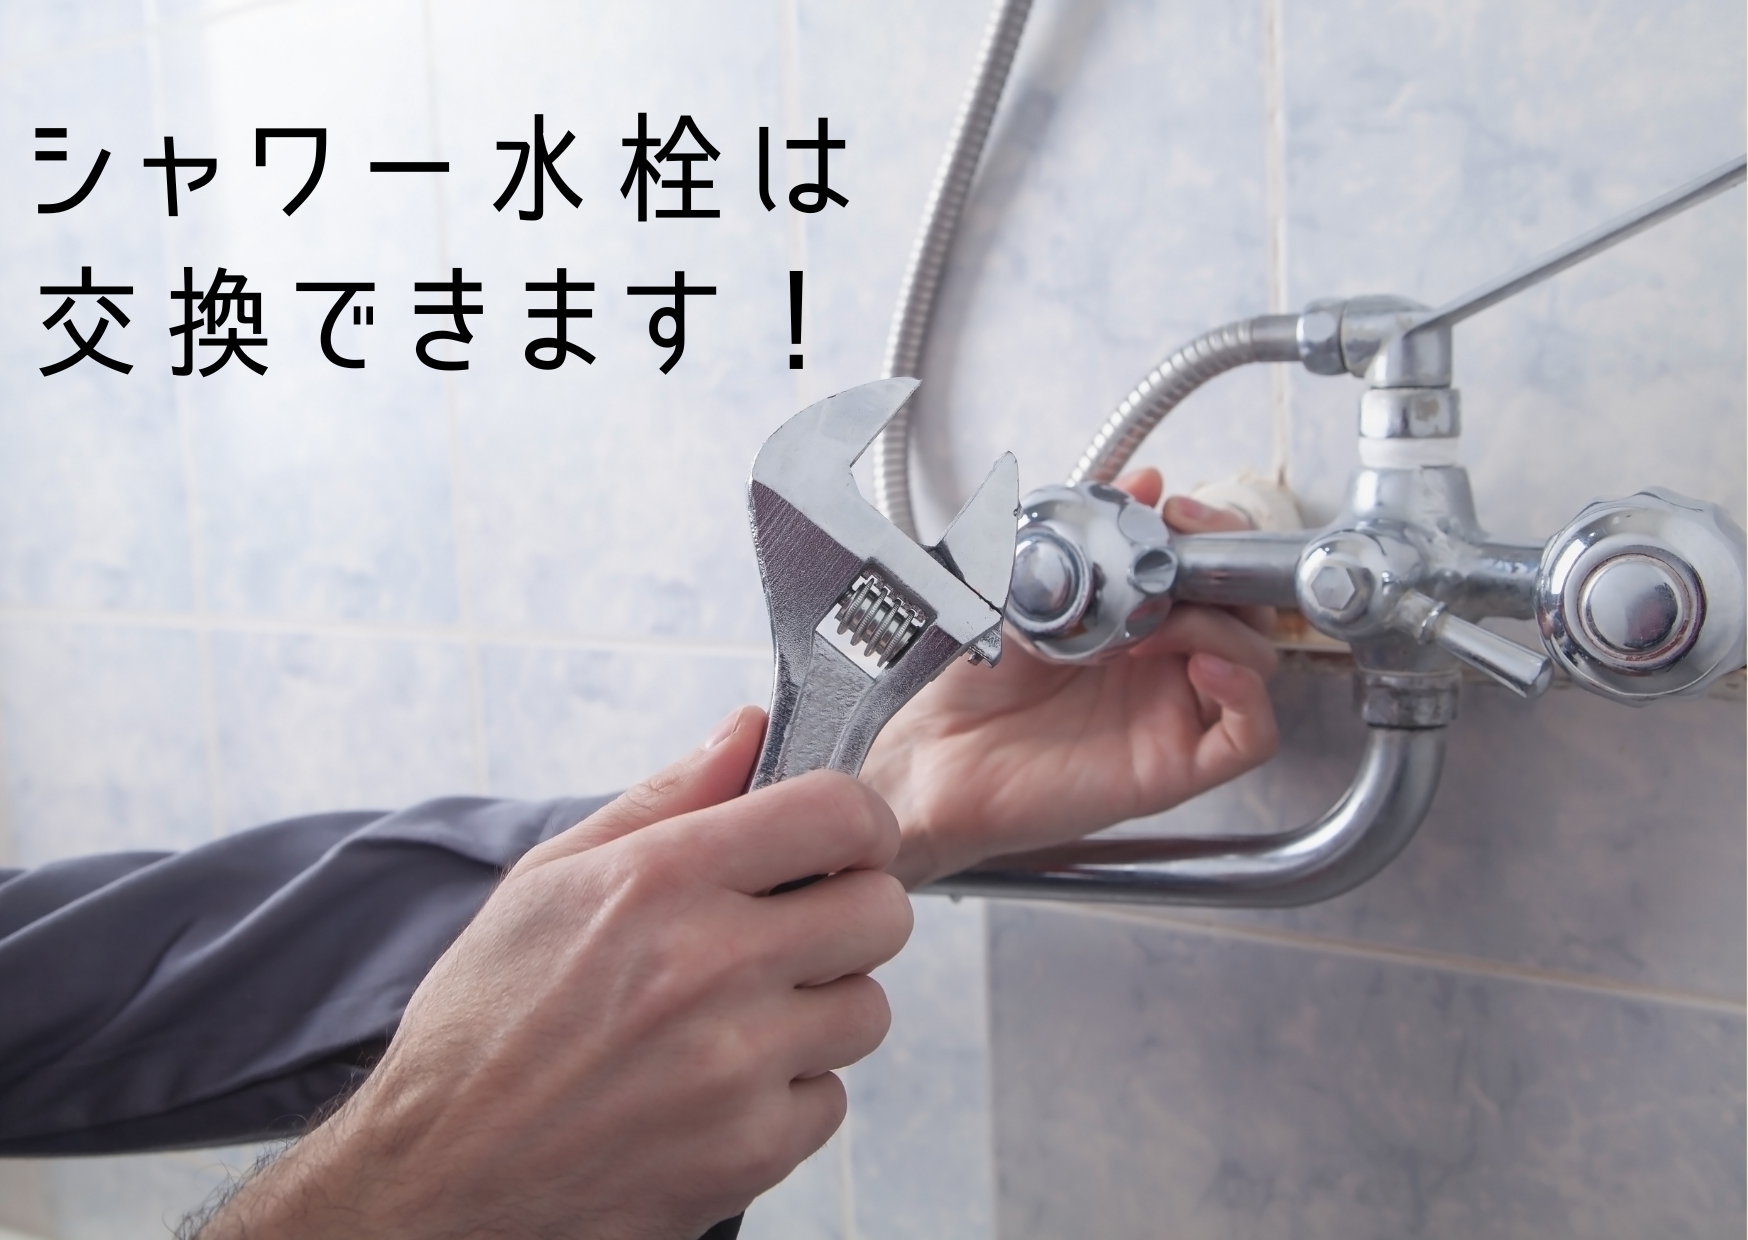 Bathroom shower faucet replacement renovation guide